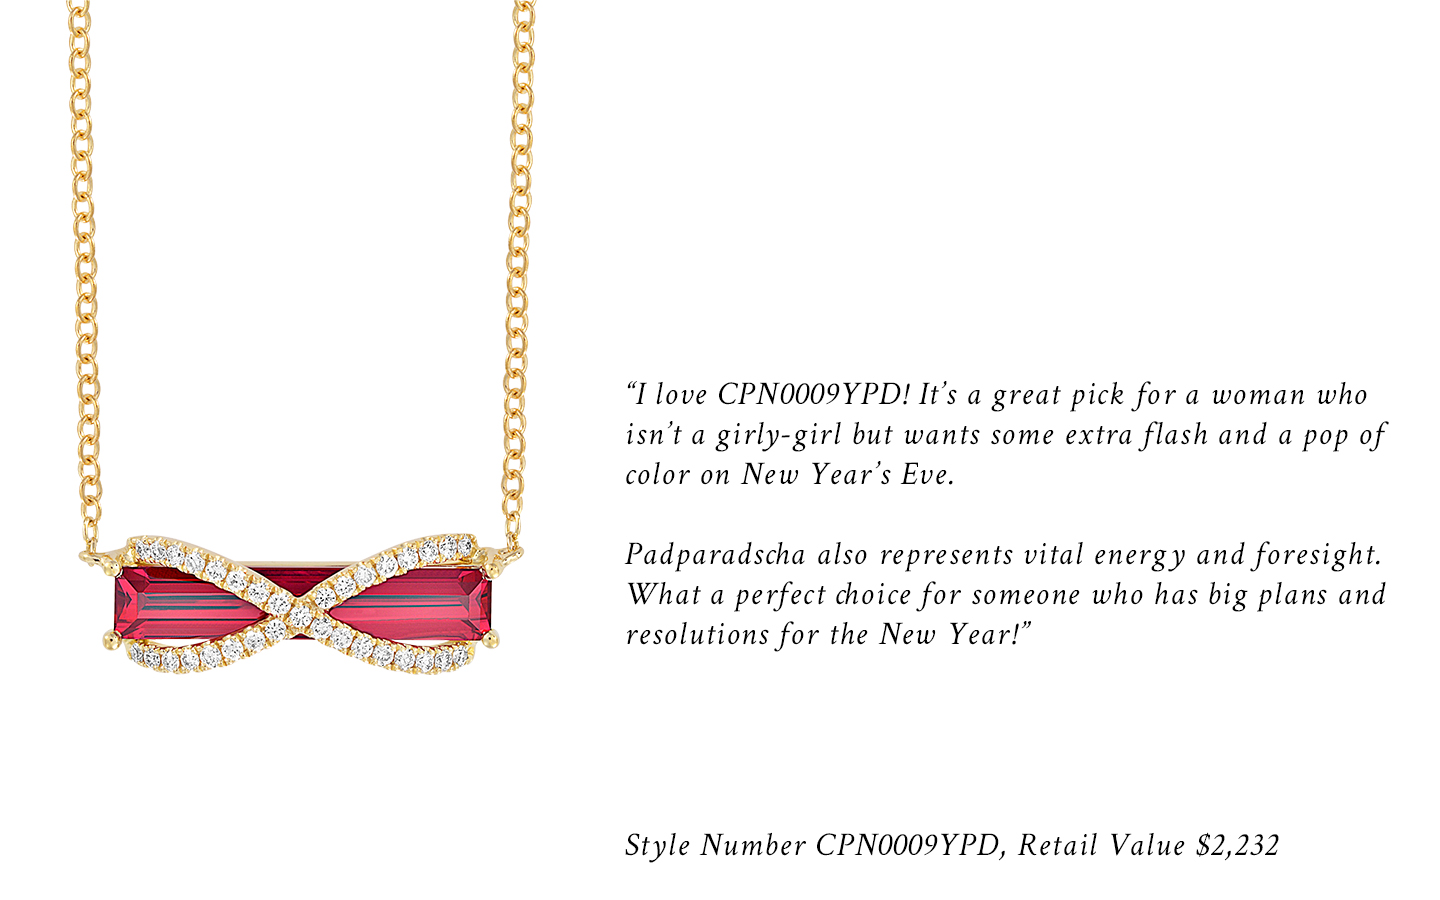 "I love CPN0009YPD! It's a great pick for a woman who isn't a girly-girl but wants some extra flash and a pop of color on New Year's Eve. Padparadscha also represents vital energy and foresight. What a perfect choice for someone who has big plans and resolutions for the New Year!" Style Number CPN0009YPD, Retail Value $2,232